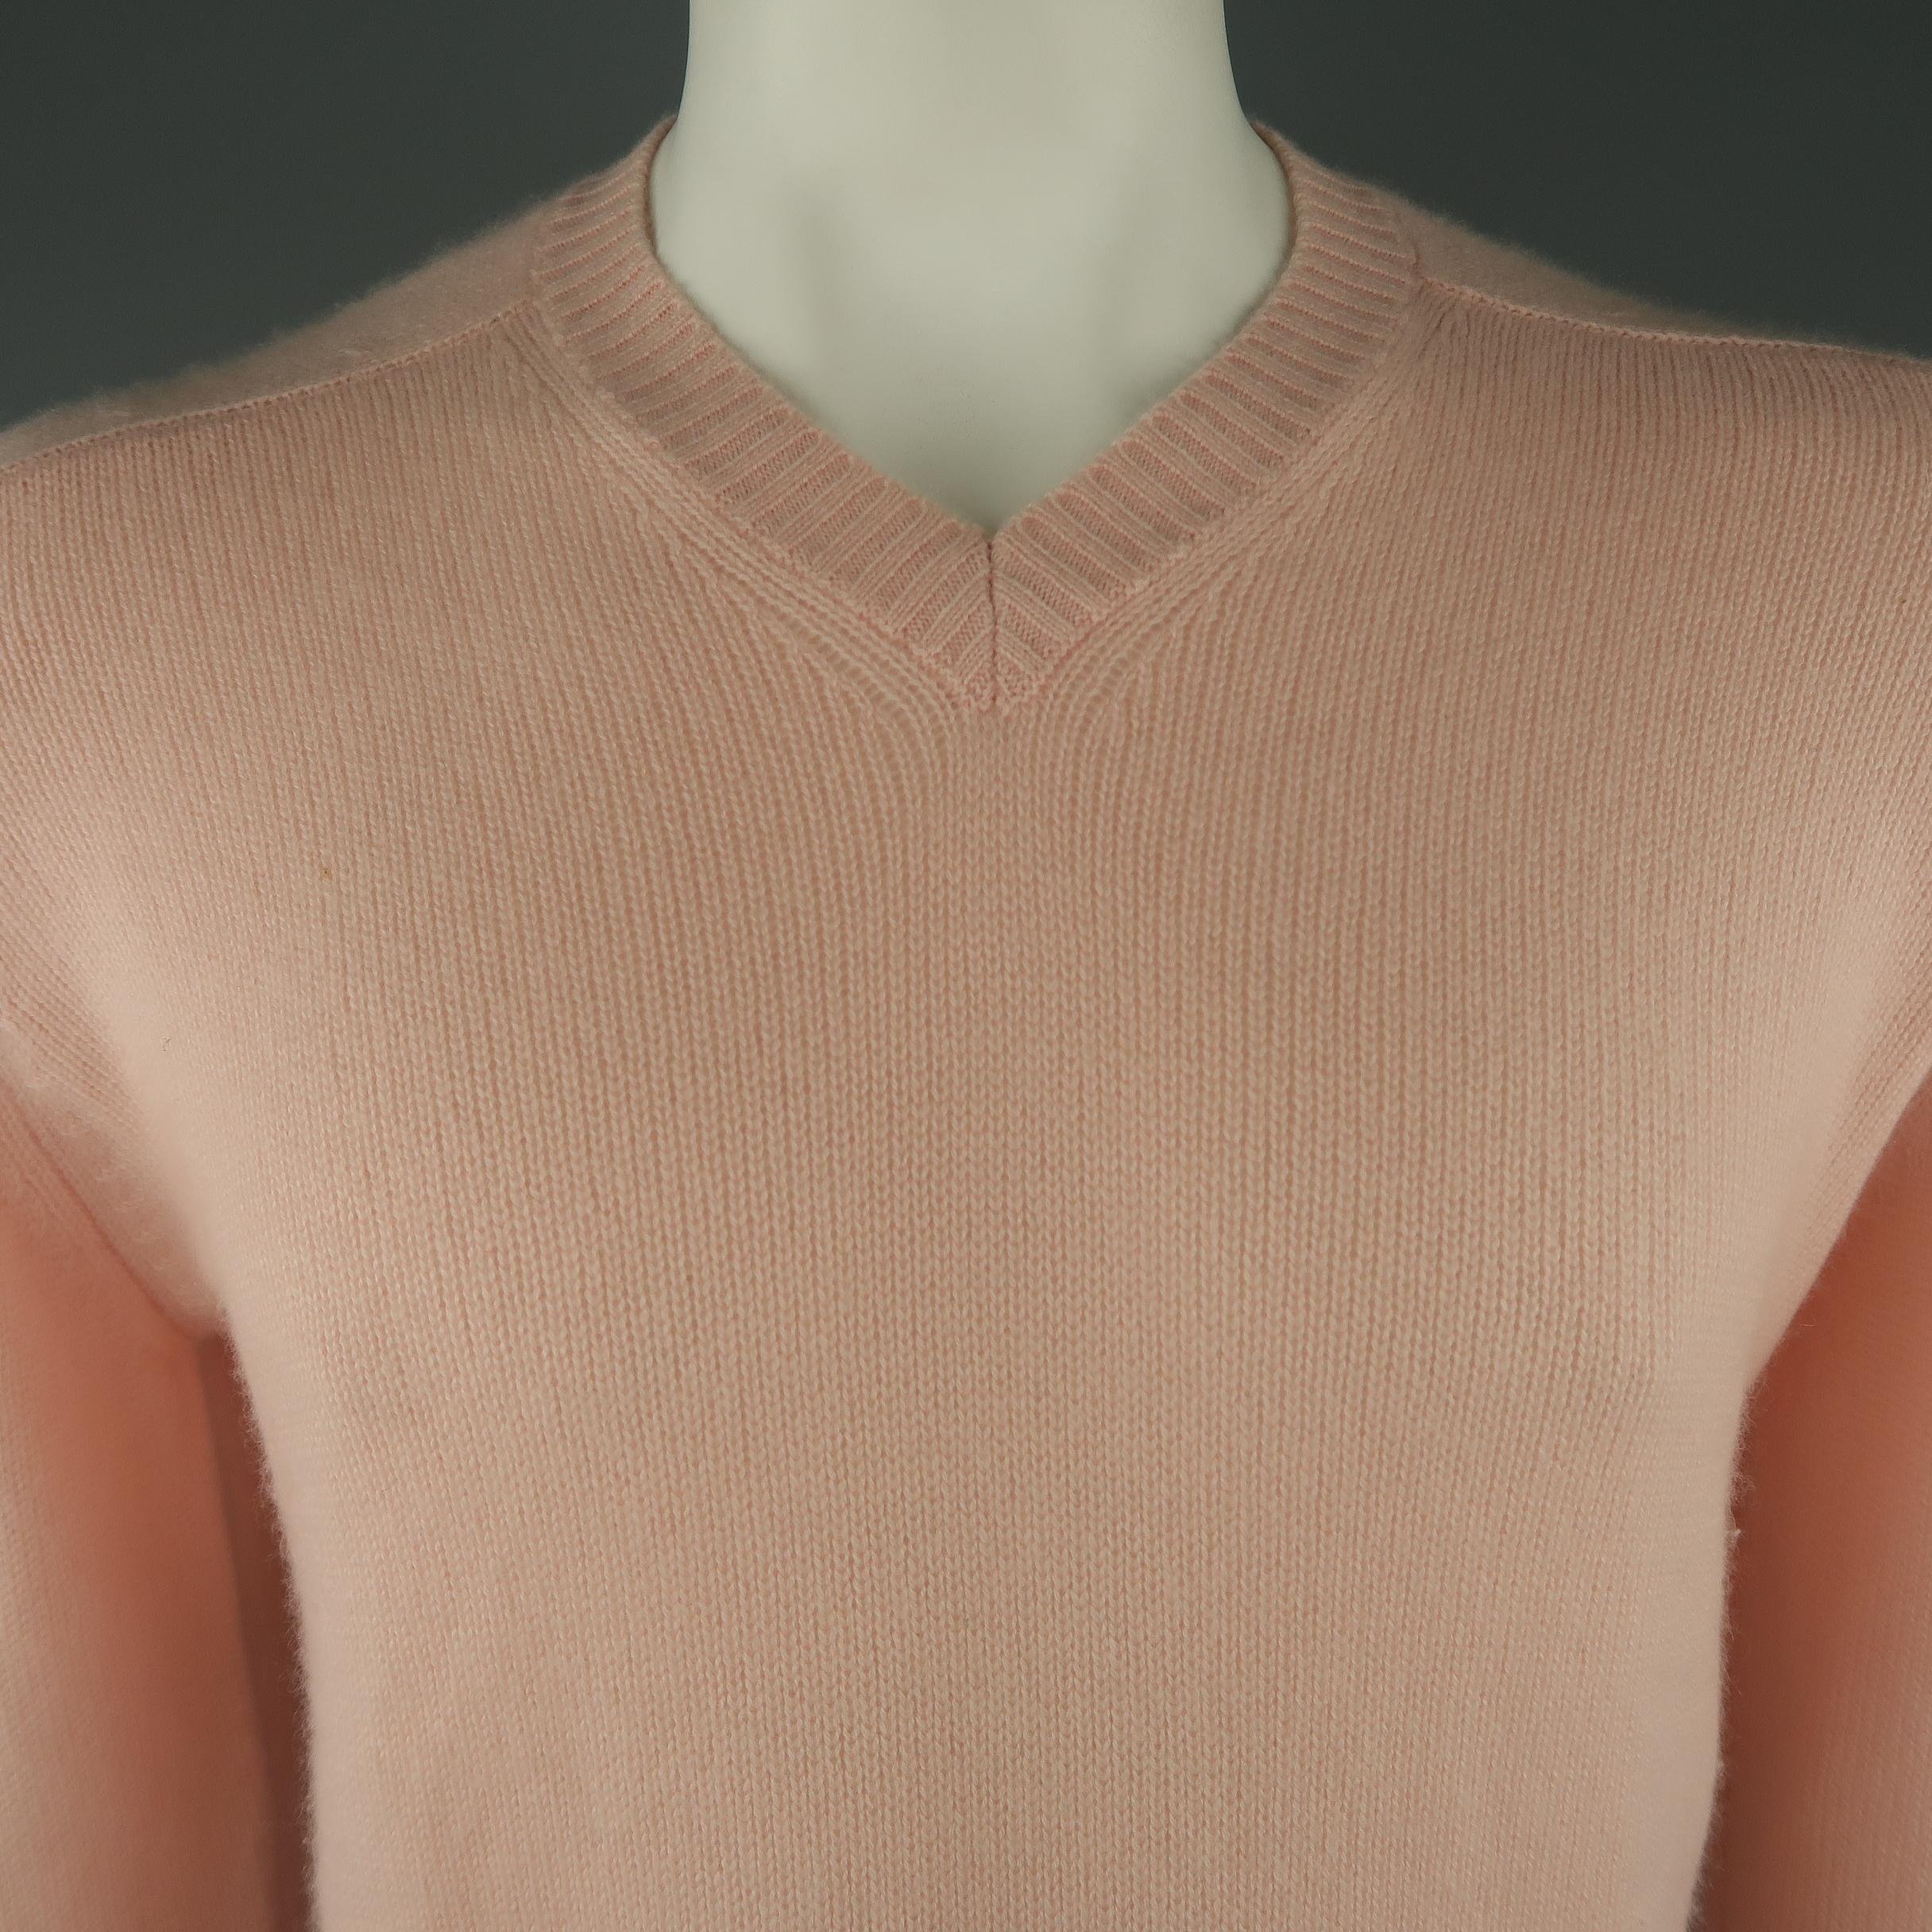 BRUNELLO CUCINELLI sweater come in a light pink  tone,  knitted cashmere material, with a V-neck, ribbed cuffs and waistband. Made in Italy.
 
Excellent Pre-Owned Condition.
Marked: 50 IT
 
Measurements:
 
Shoulder: 17.5 in.
Chest: 45 in.
Sleeve: 28